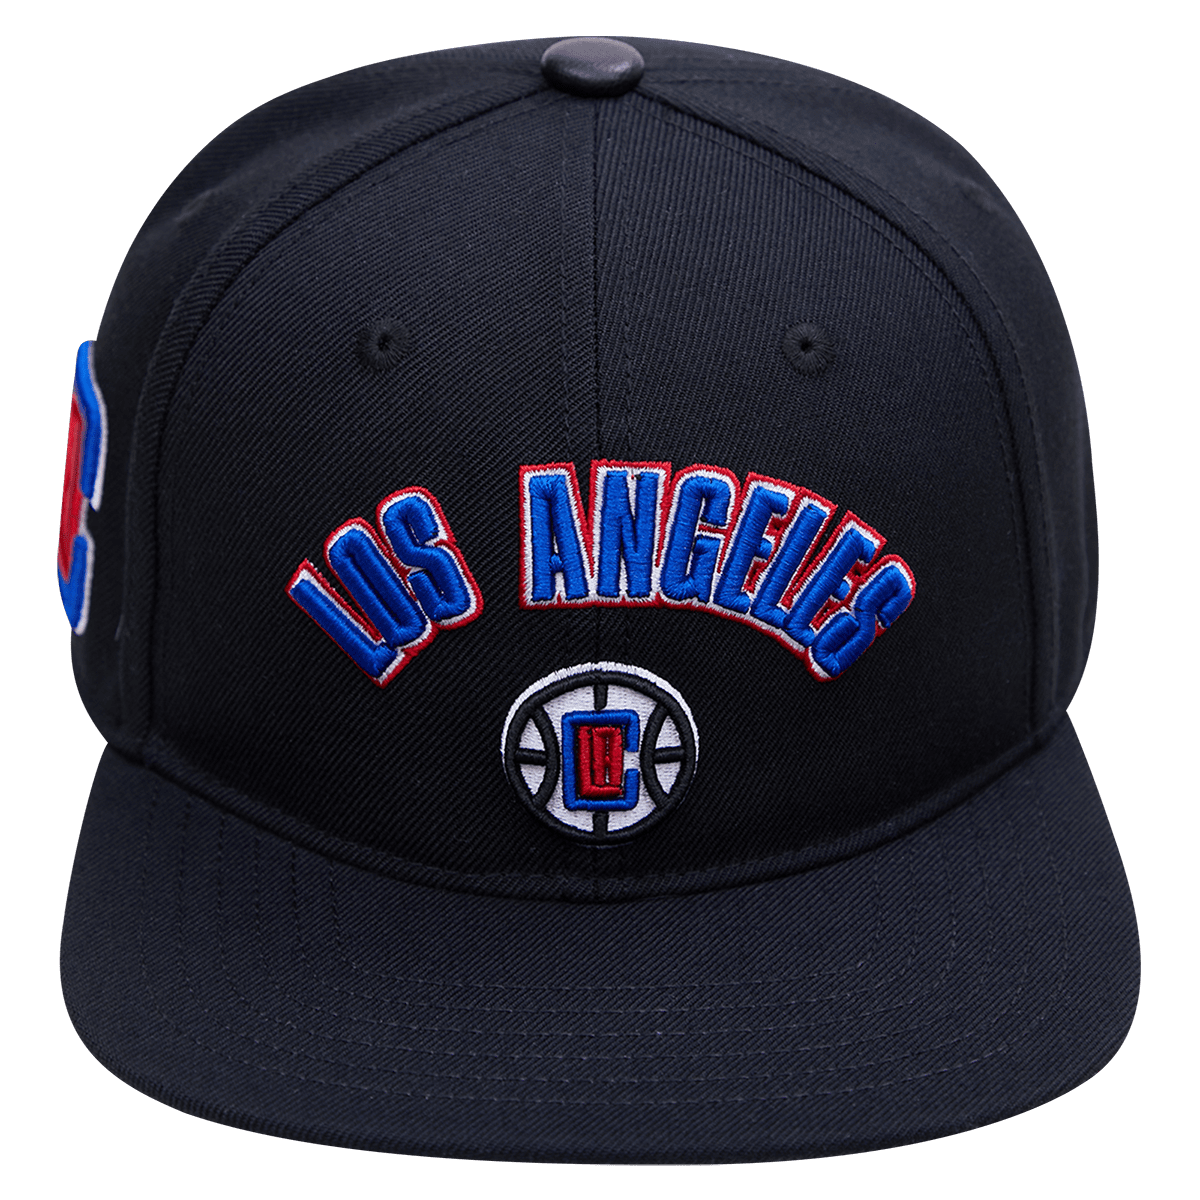 LOS ANGELES CLIPPERS STACKED LOGO SNAPBACK HAT (ROYAL BLUE) – Pro Standard